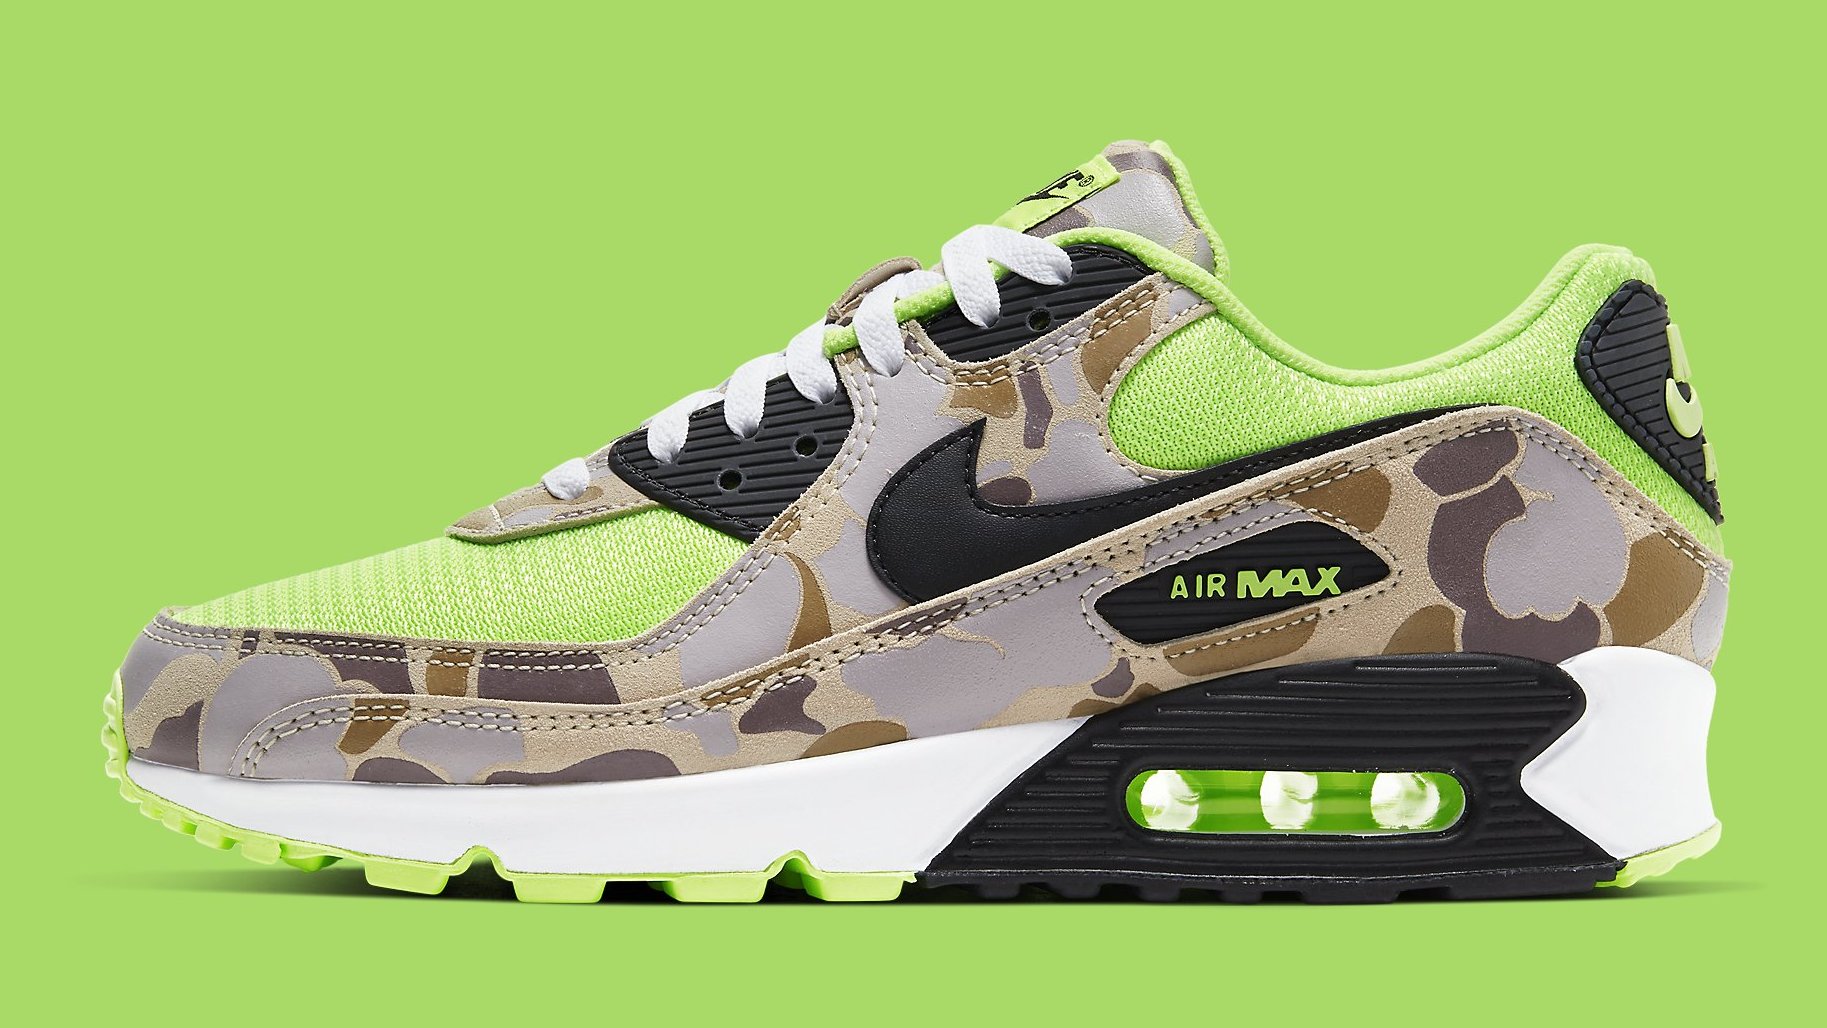 Nike Air Max 90 Volt Duck Camo Ghost Green Release Date CW4039 300 Profile